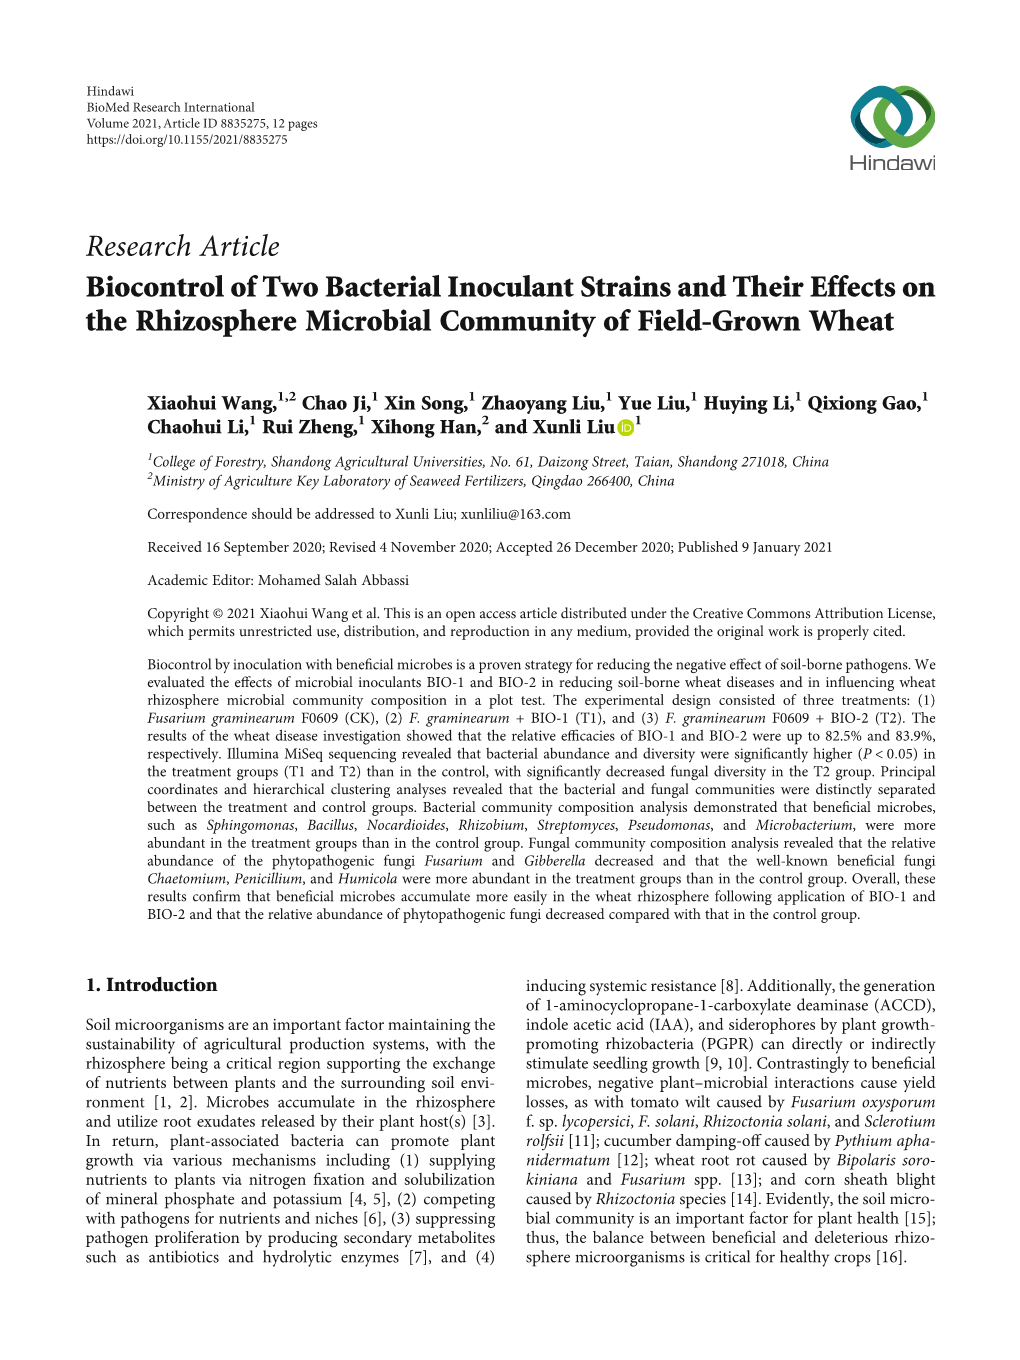 Biocontrol of Two Bacterial Inoculant Strains and Their Effects on the Rhizosphere Microbial Community of Field-Grown Wheat